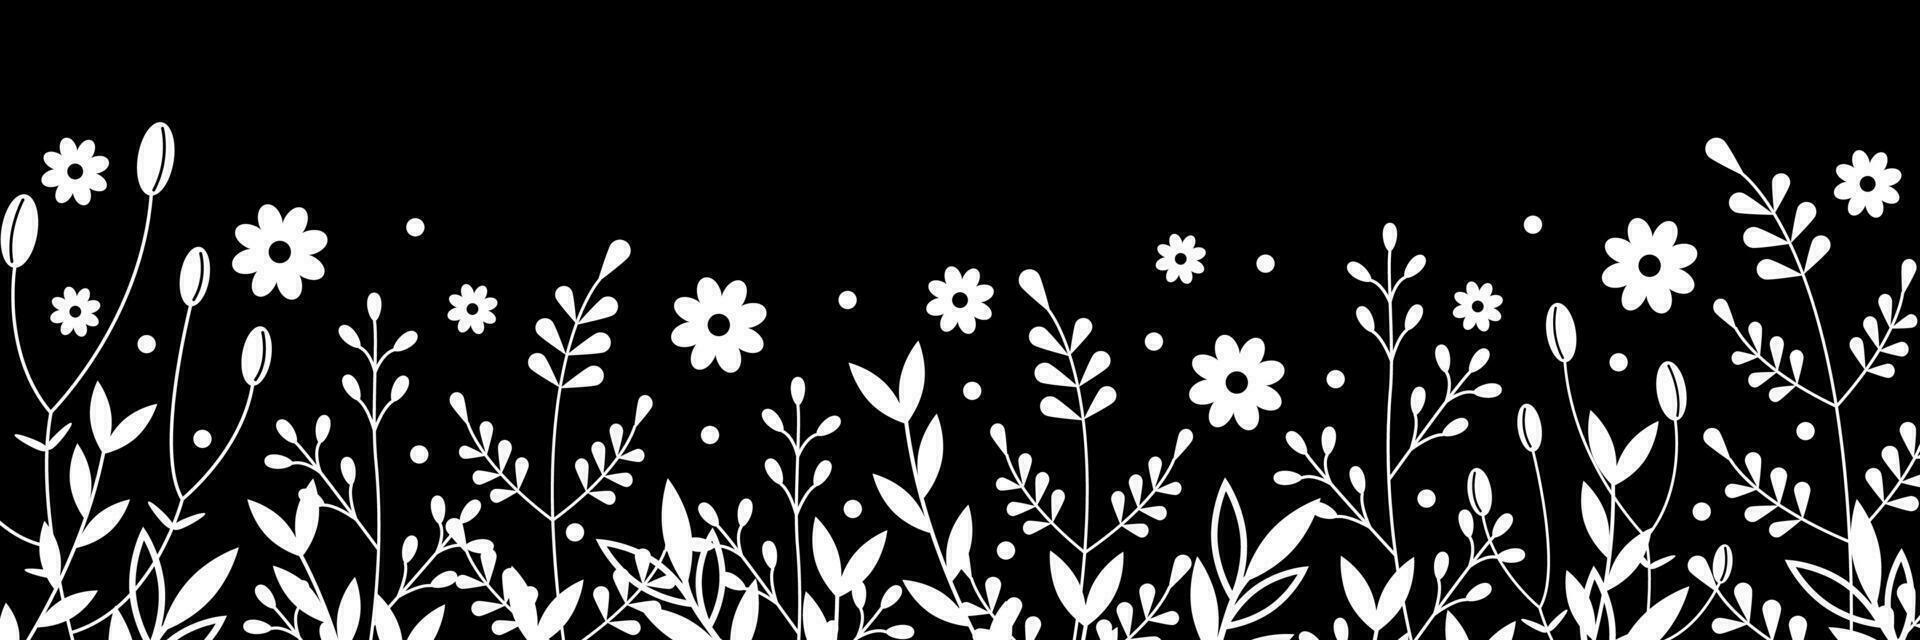 Monochrome floral border. Banner with twigs, leaves and flowers. Vector illustration. Black and white botanical night background.